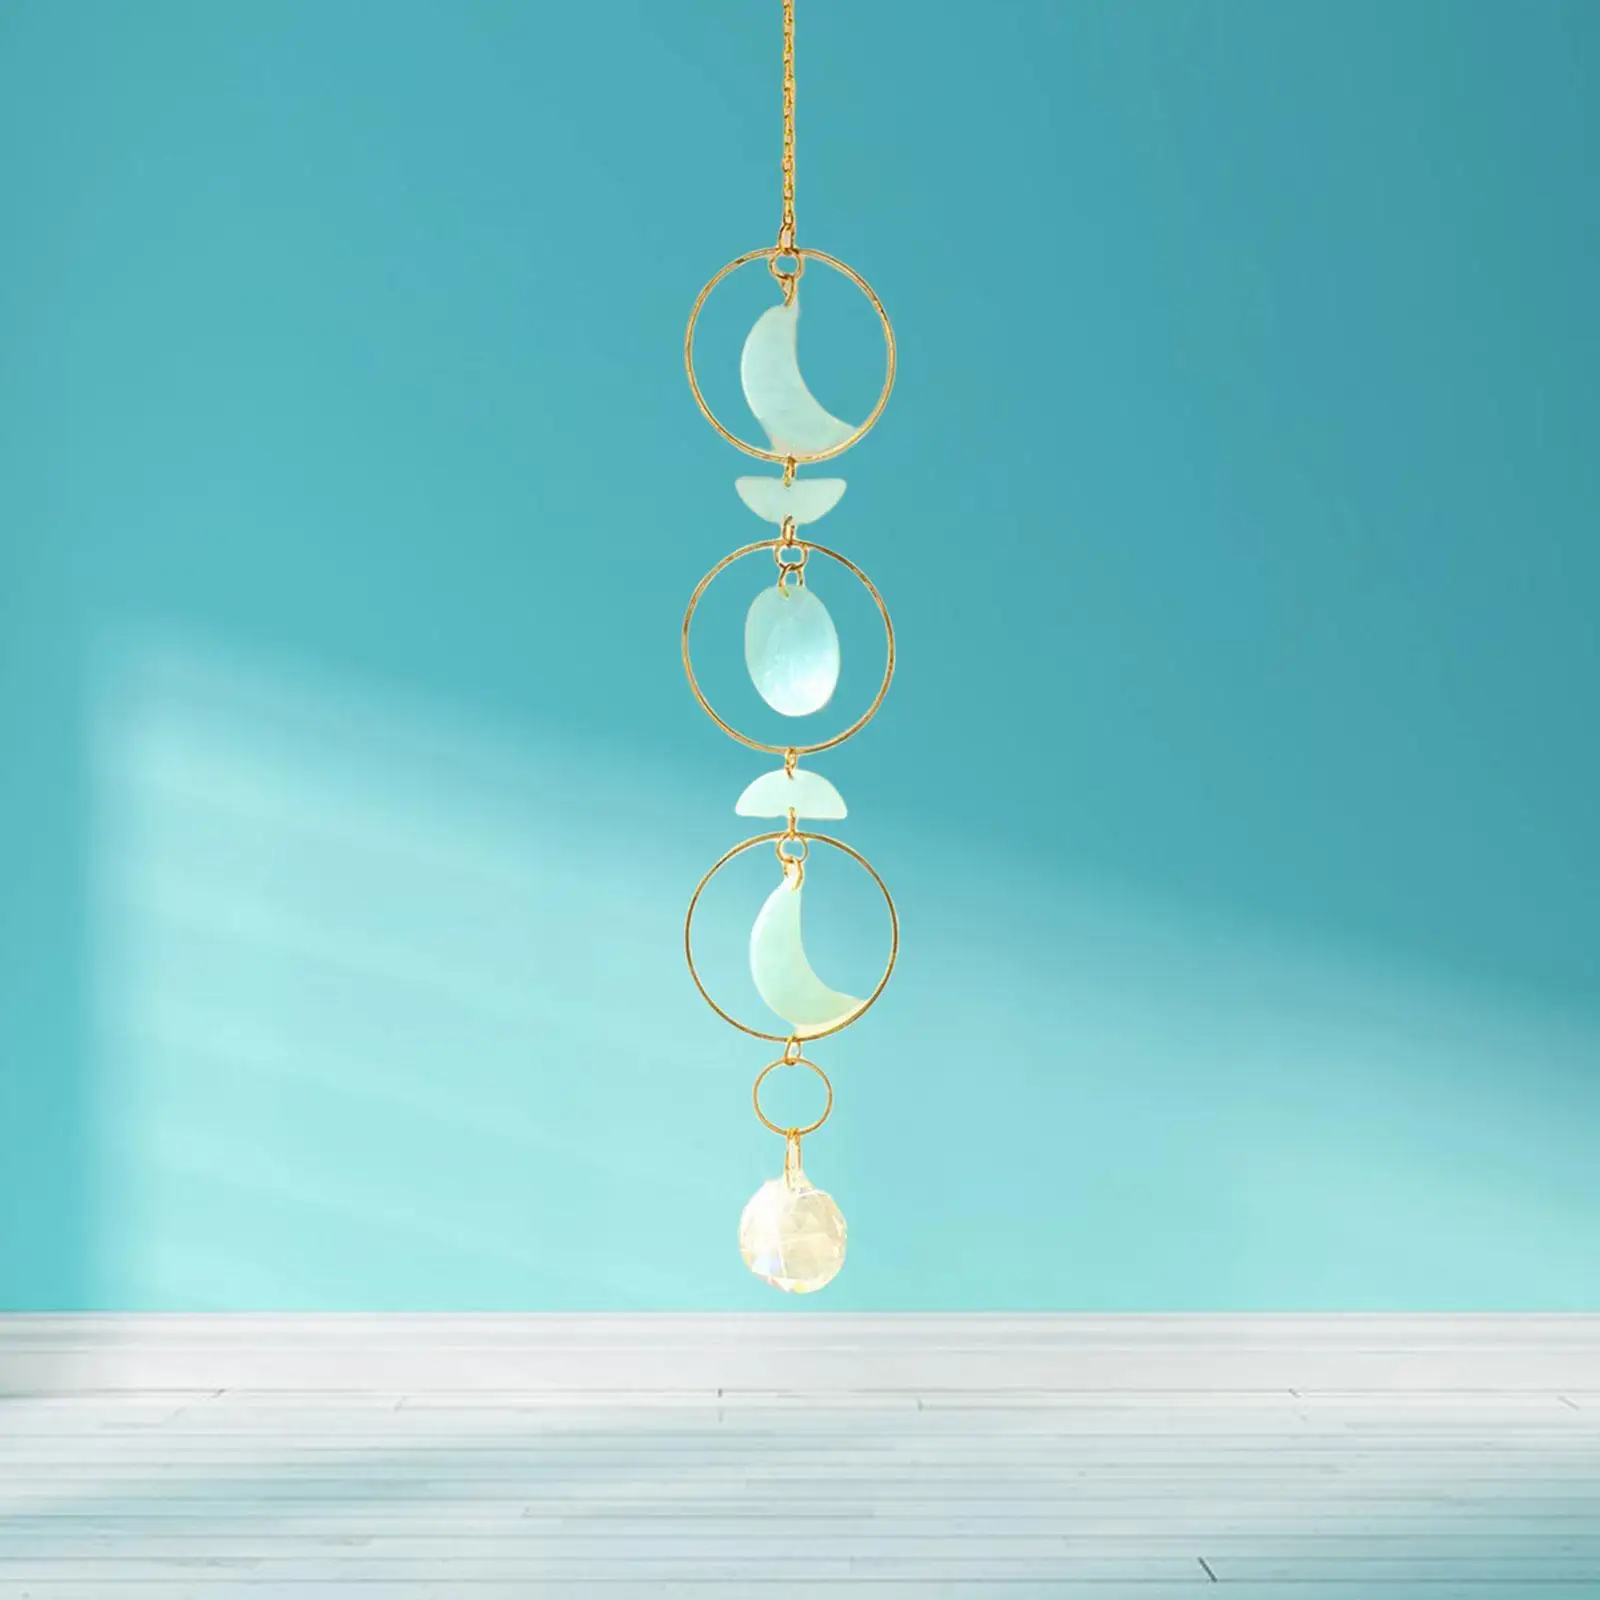 Hanging Pendant Prisms Decor with Chain Ornament for Office Wedding Decor